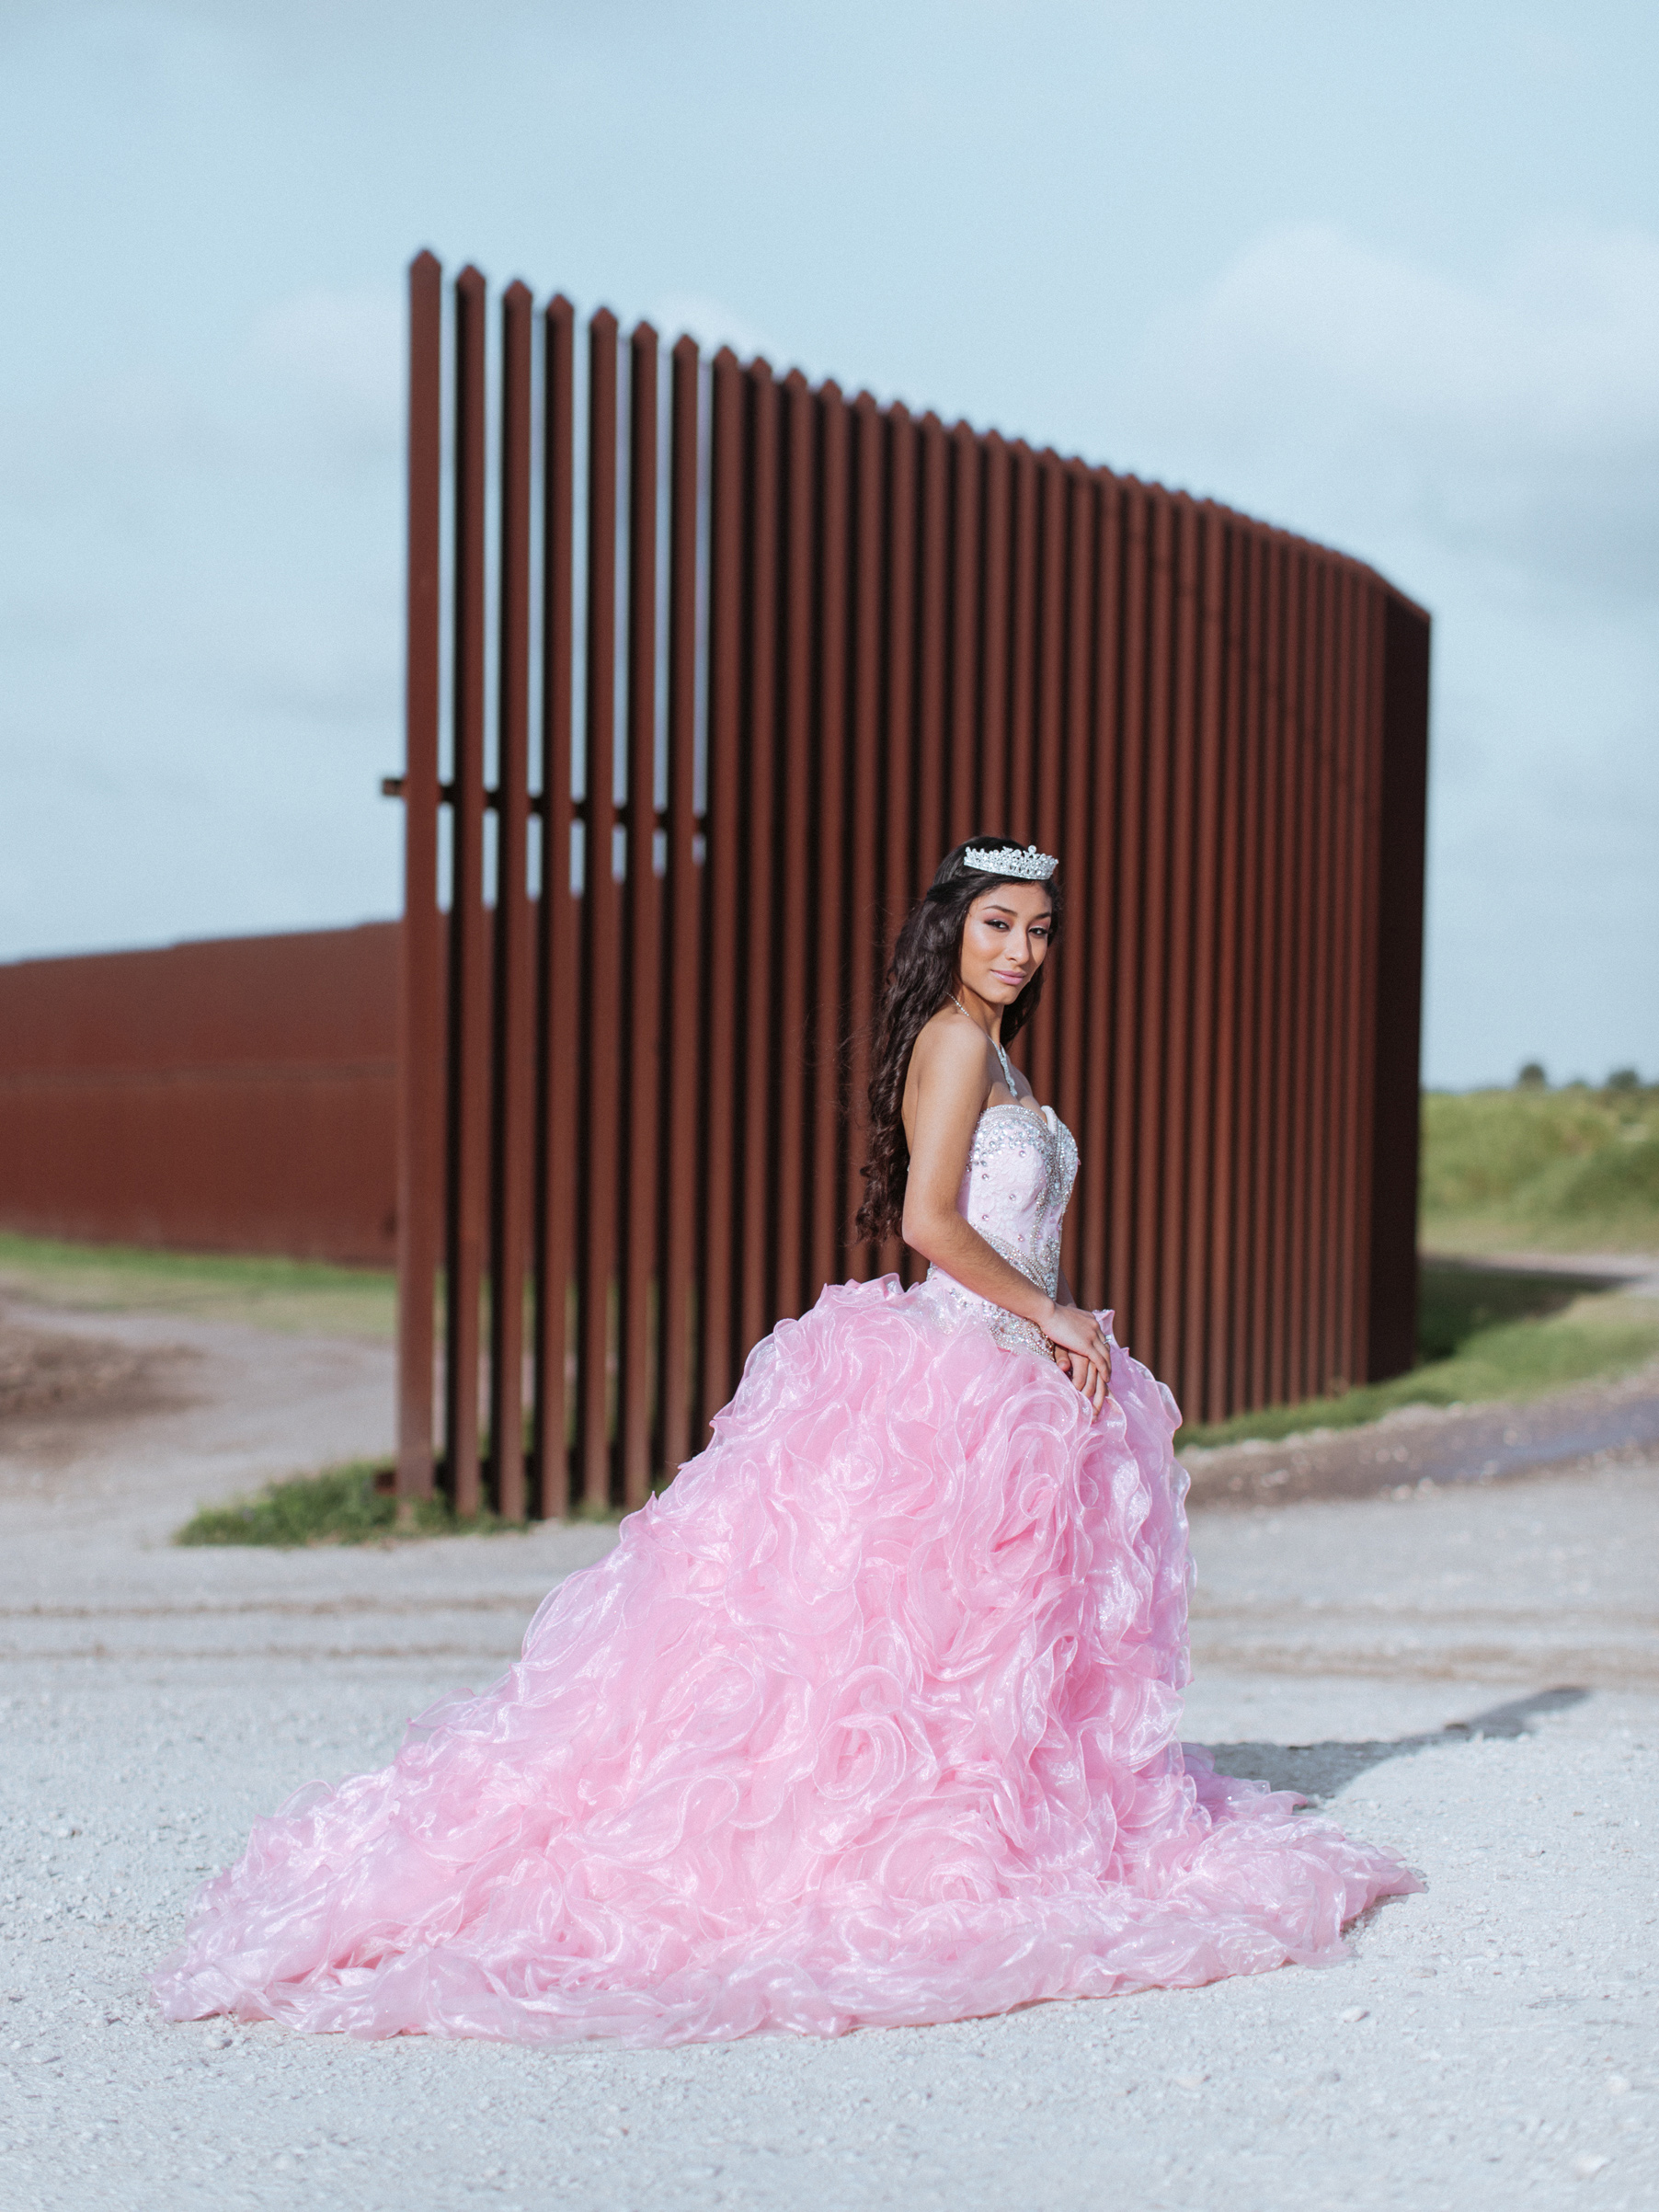 Jaymin Martinez in her quinceanera dress next to the border fence, Brownsville, Texas. (Elliot Ross)